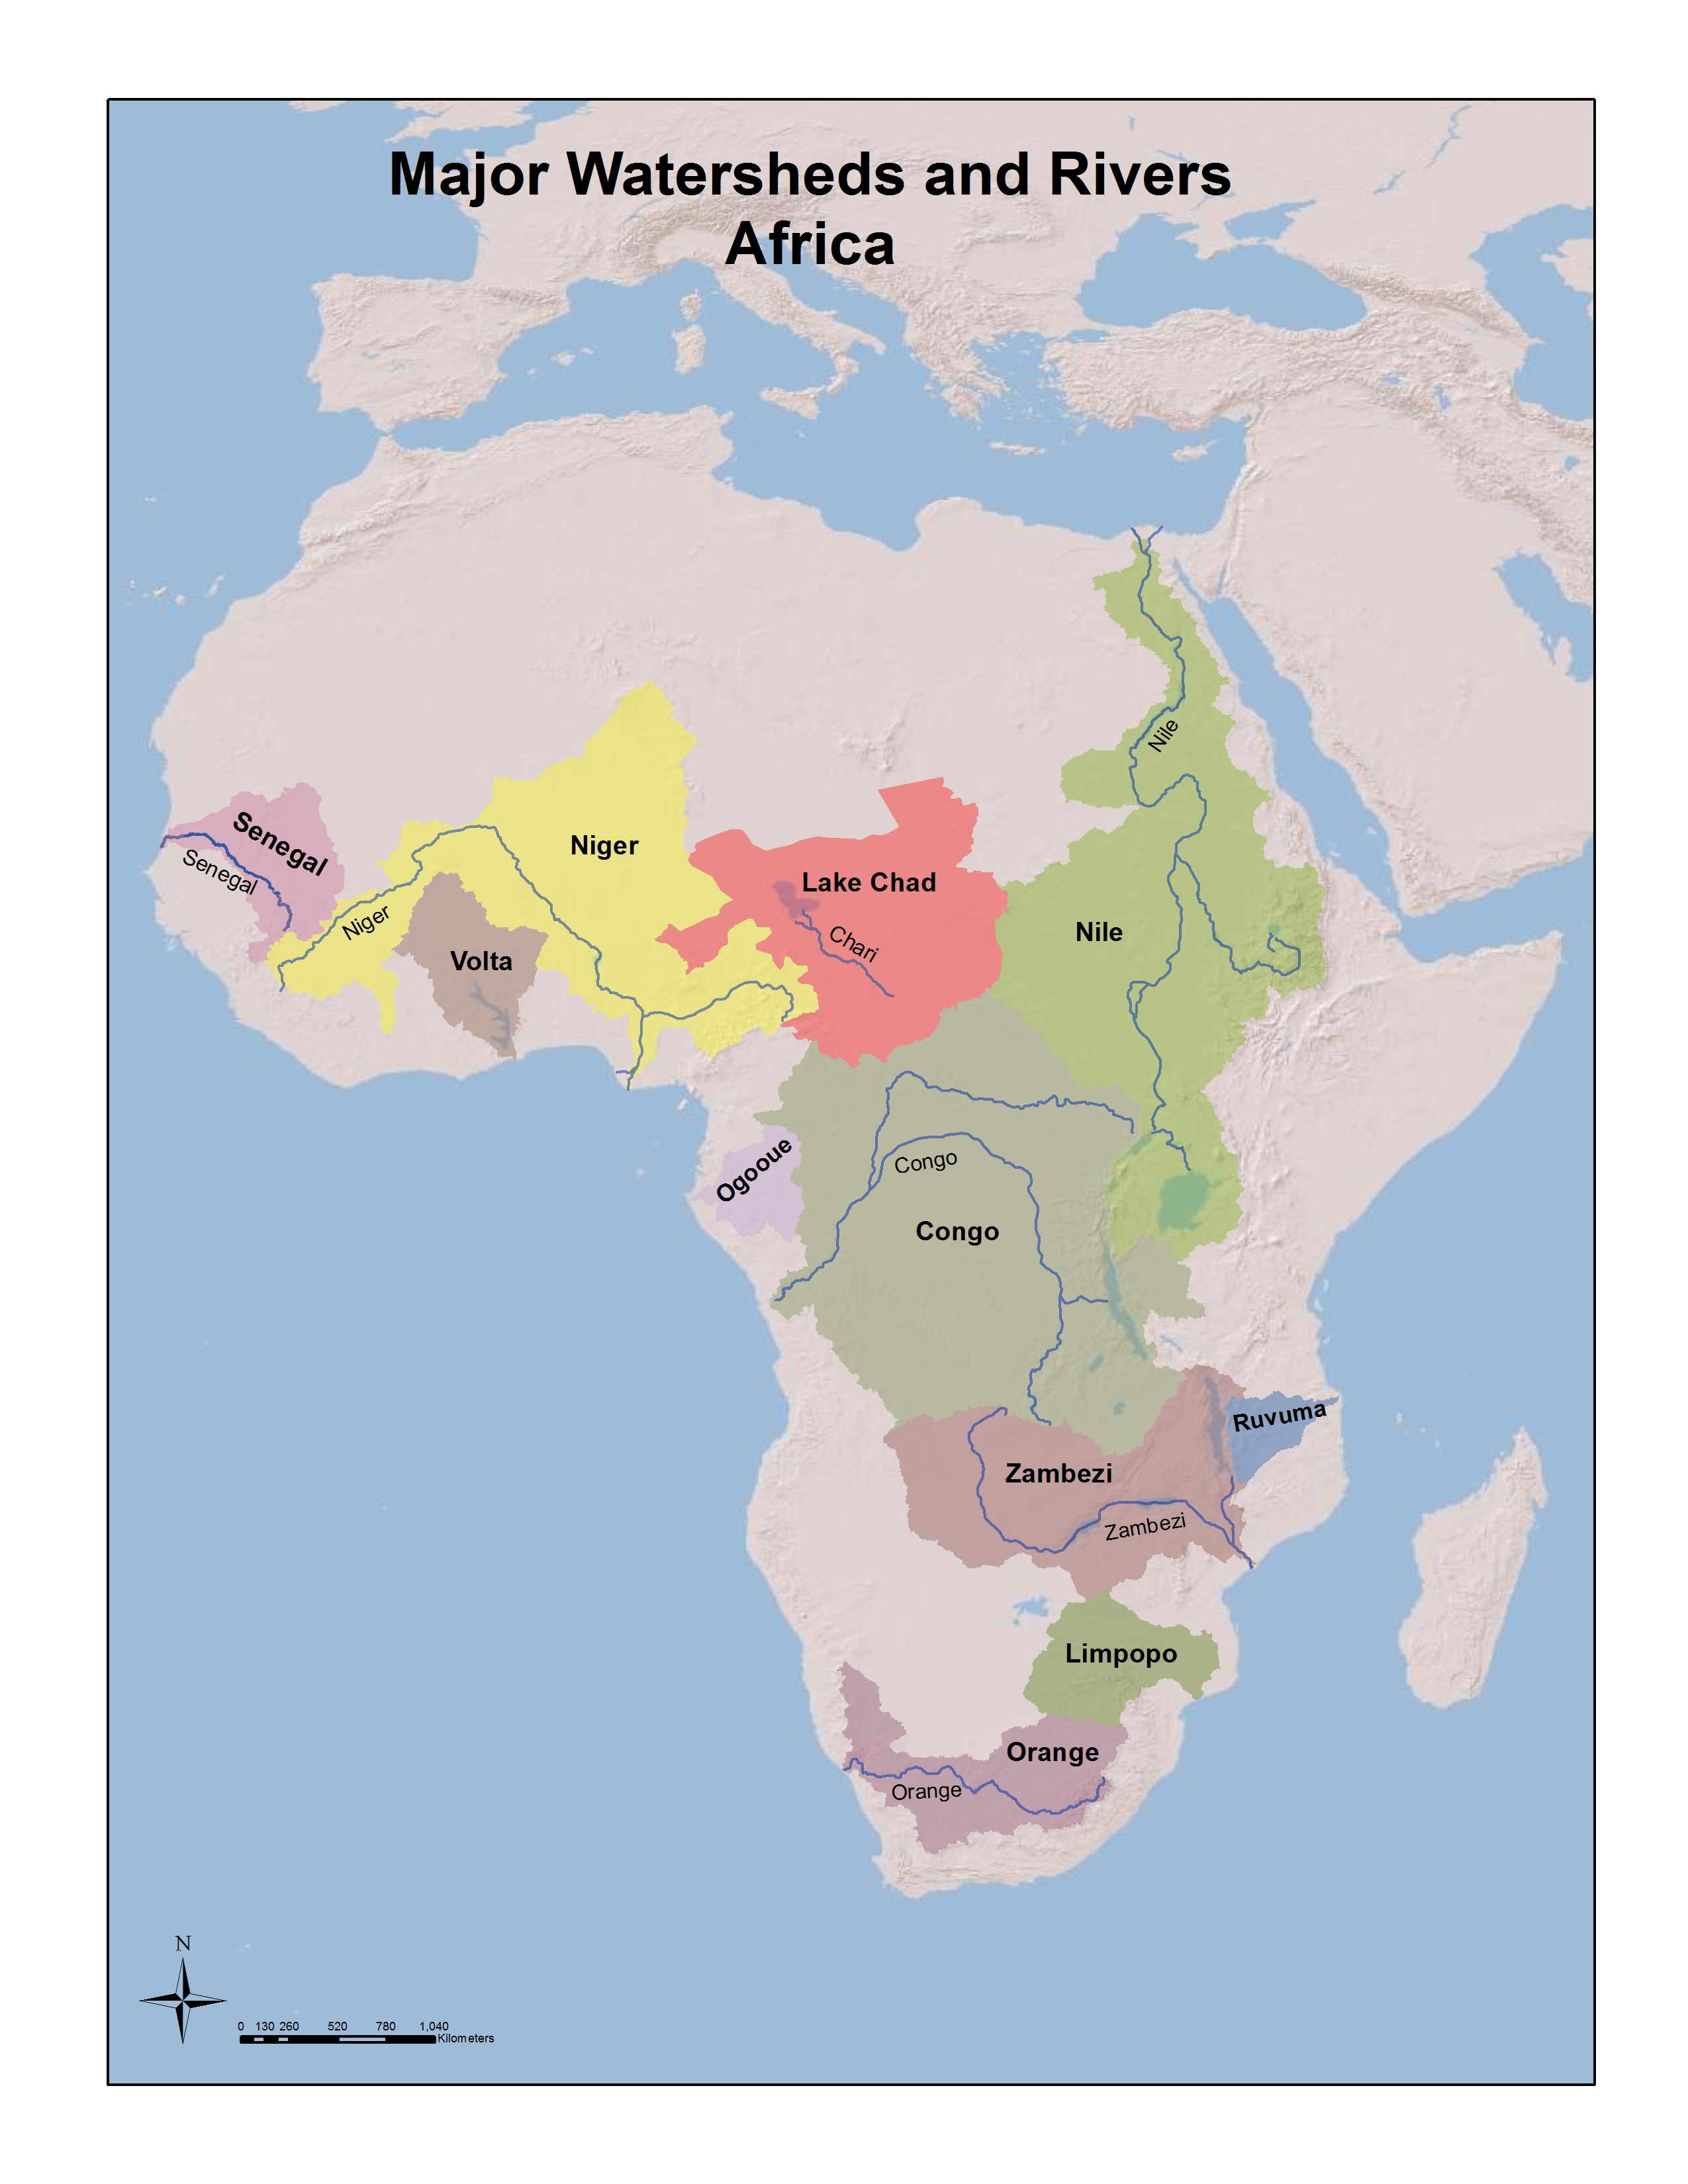 Major Watersheds And Rivers Of Africa Open Rivers Journal